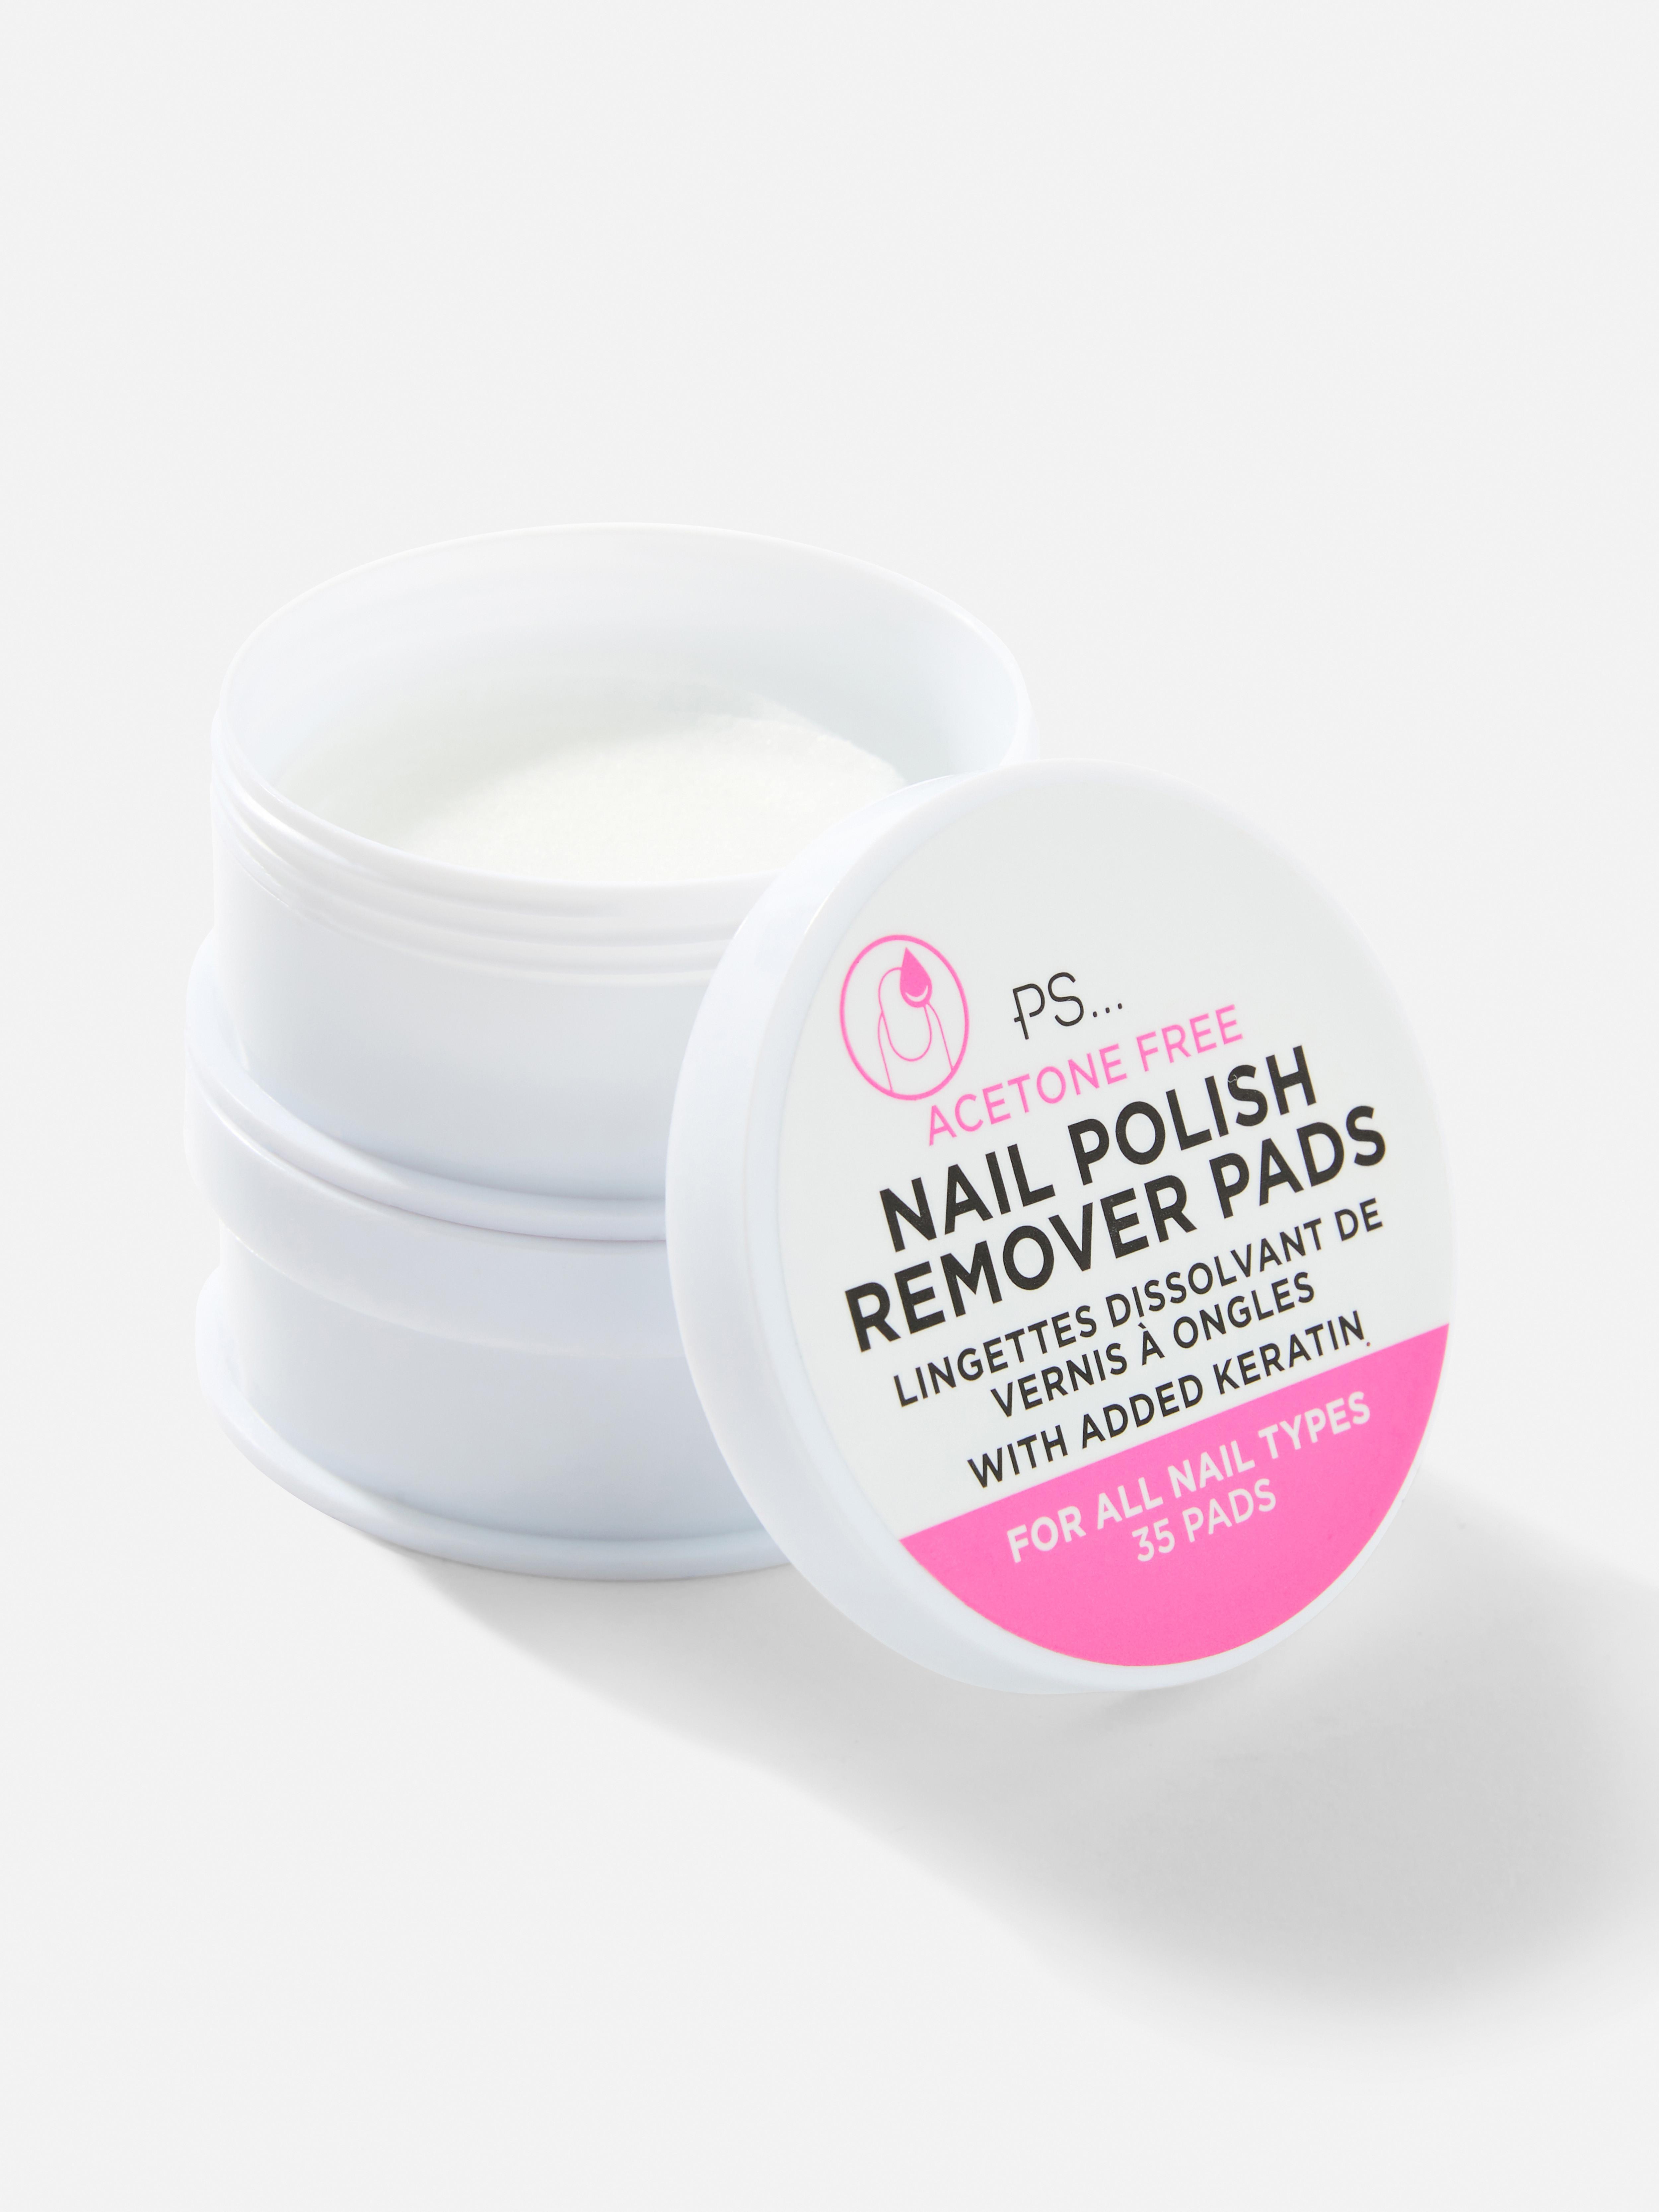 PS... Acetone Free Nail Polish Remover Pads | Primark